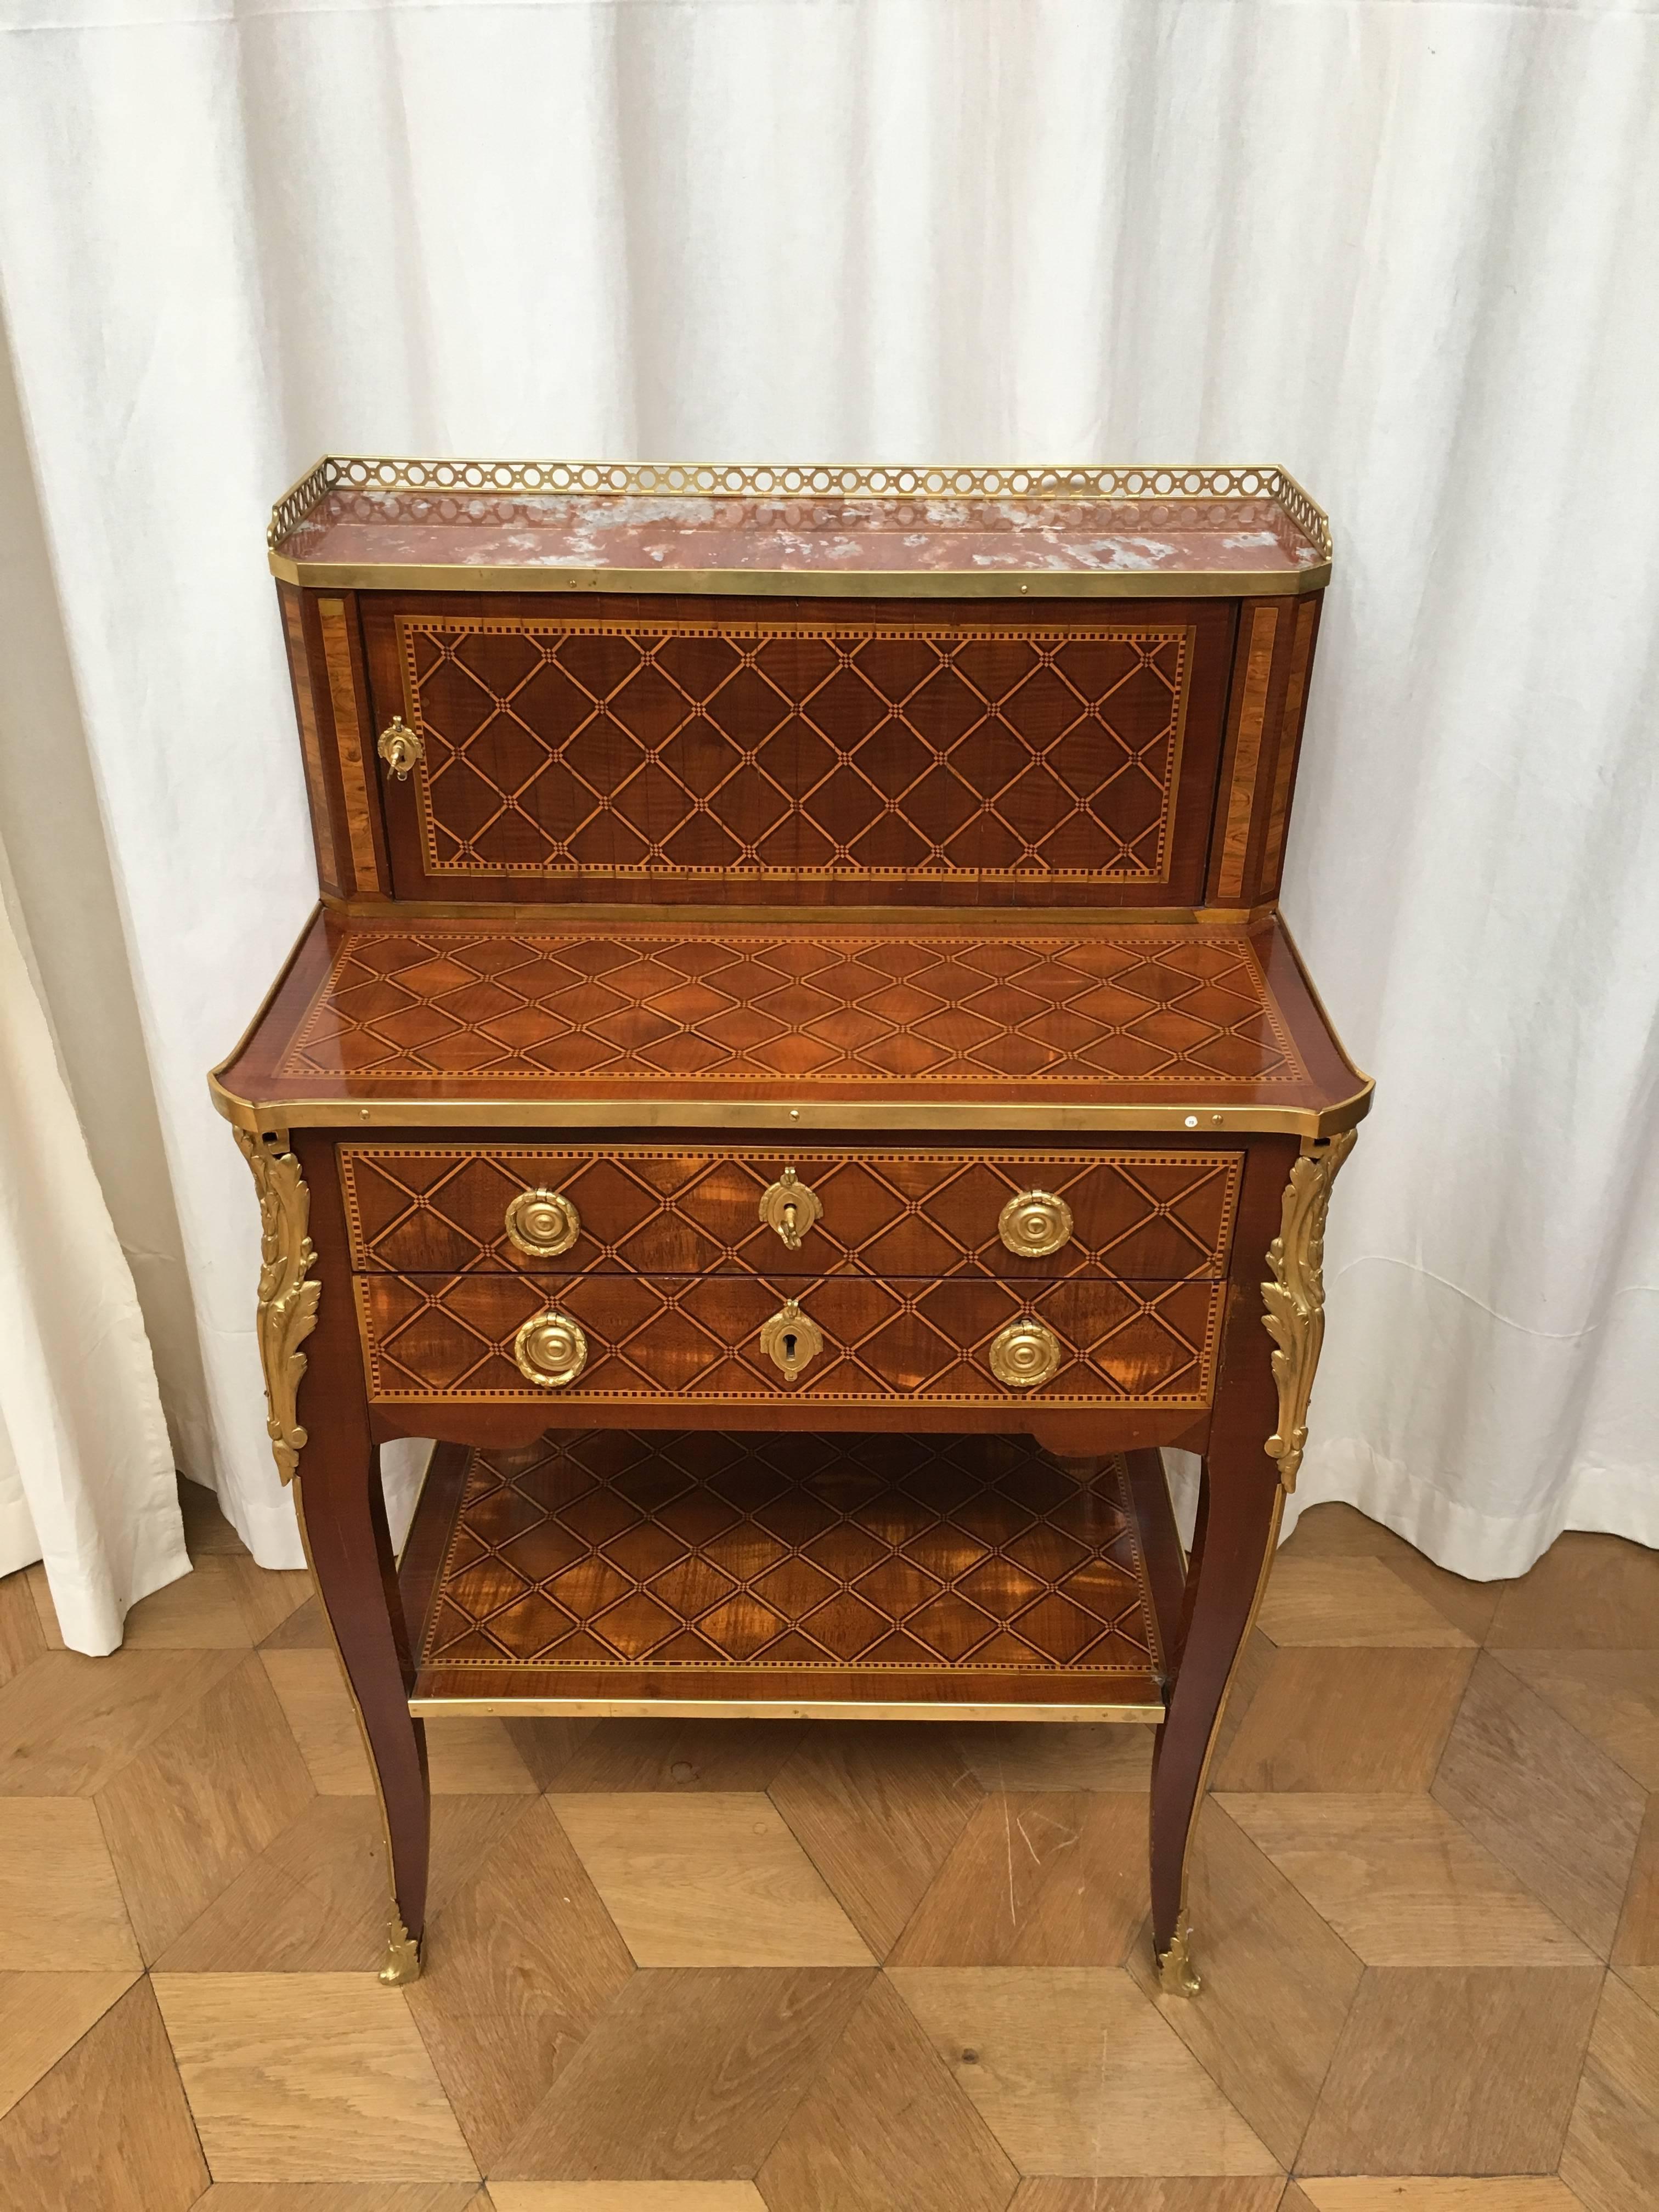 Inlaid overall with a trellis pattern in ebony and boxwood, the raised superstructure with later three-quater galleried red marble top above a tambour shutter enclosing a plain interior, the base with a secretaire drawer with hinged flap above a